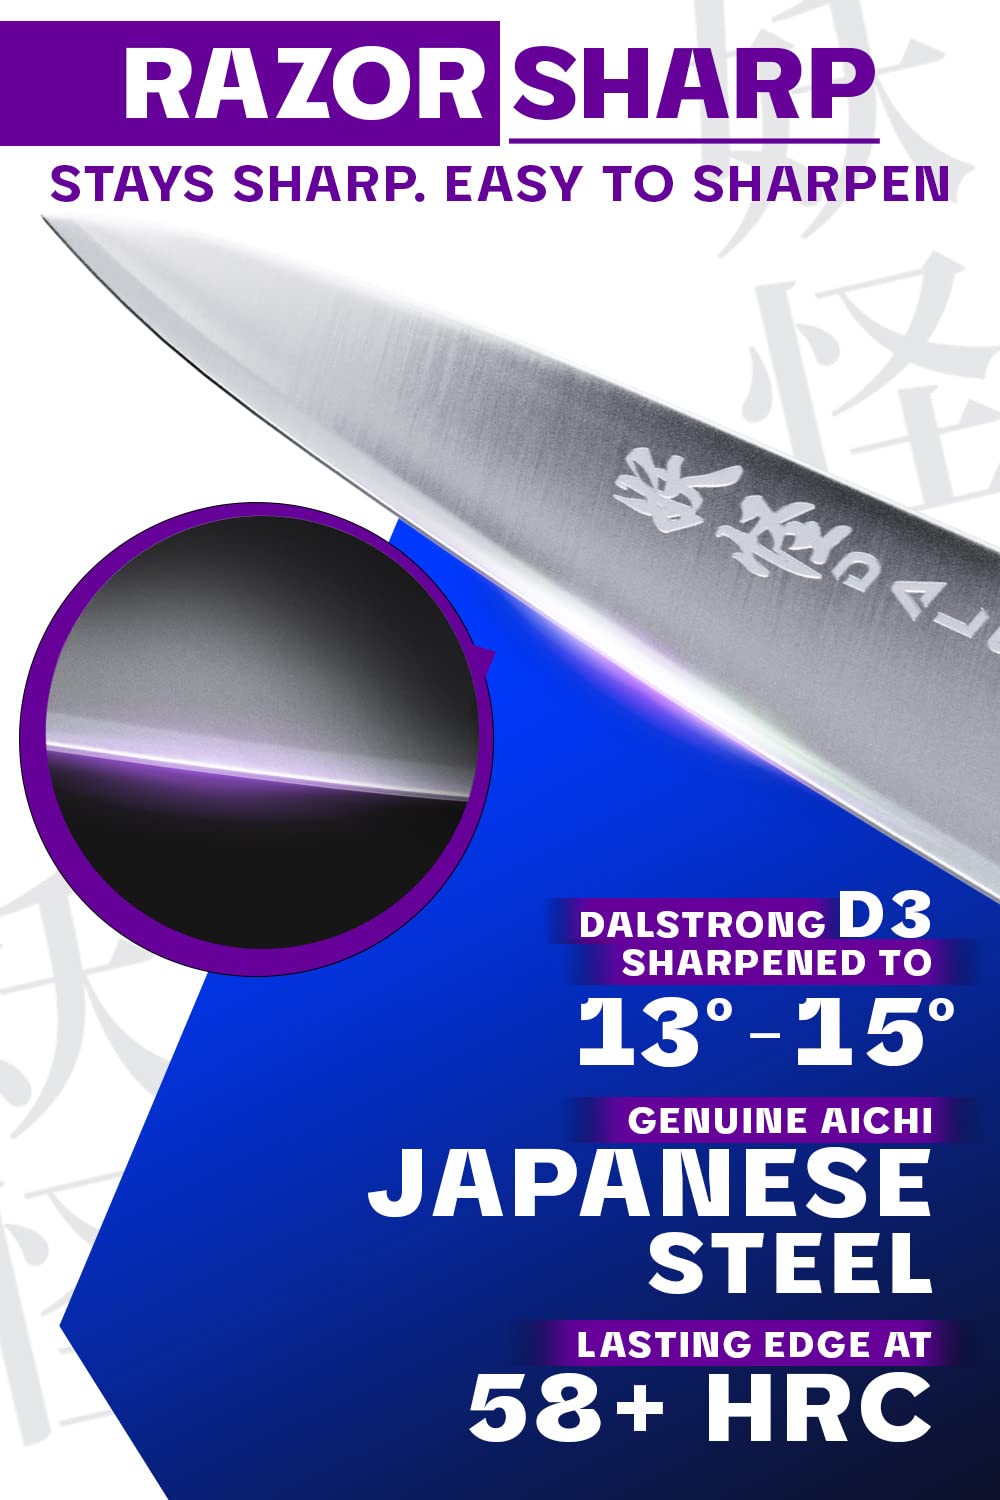 Dalstrong Chef Knife - 8 inch - Phantom Series - Japanese High-Carbon AUS8 Steel Kitchen Knife - Olive Wood Handle - Cooking Knife - Chef's Knife - w/Sheath